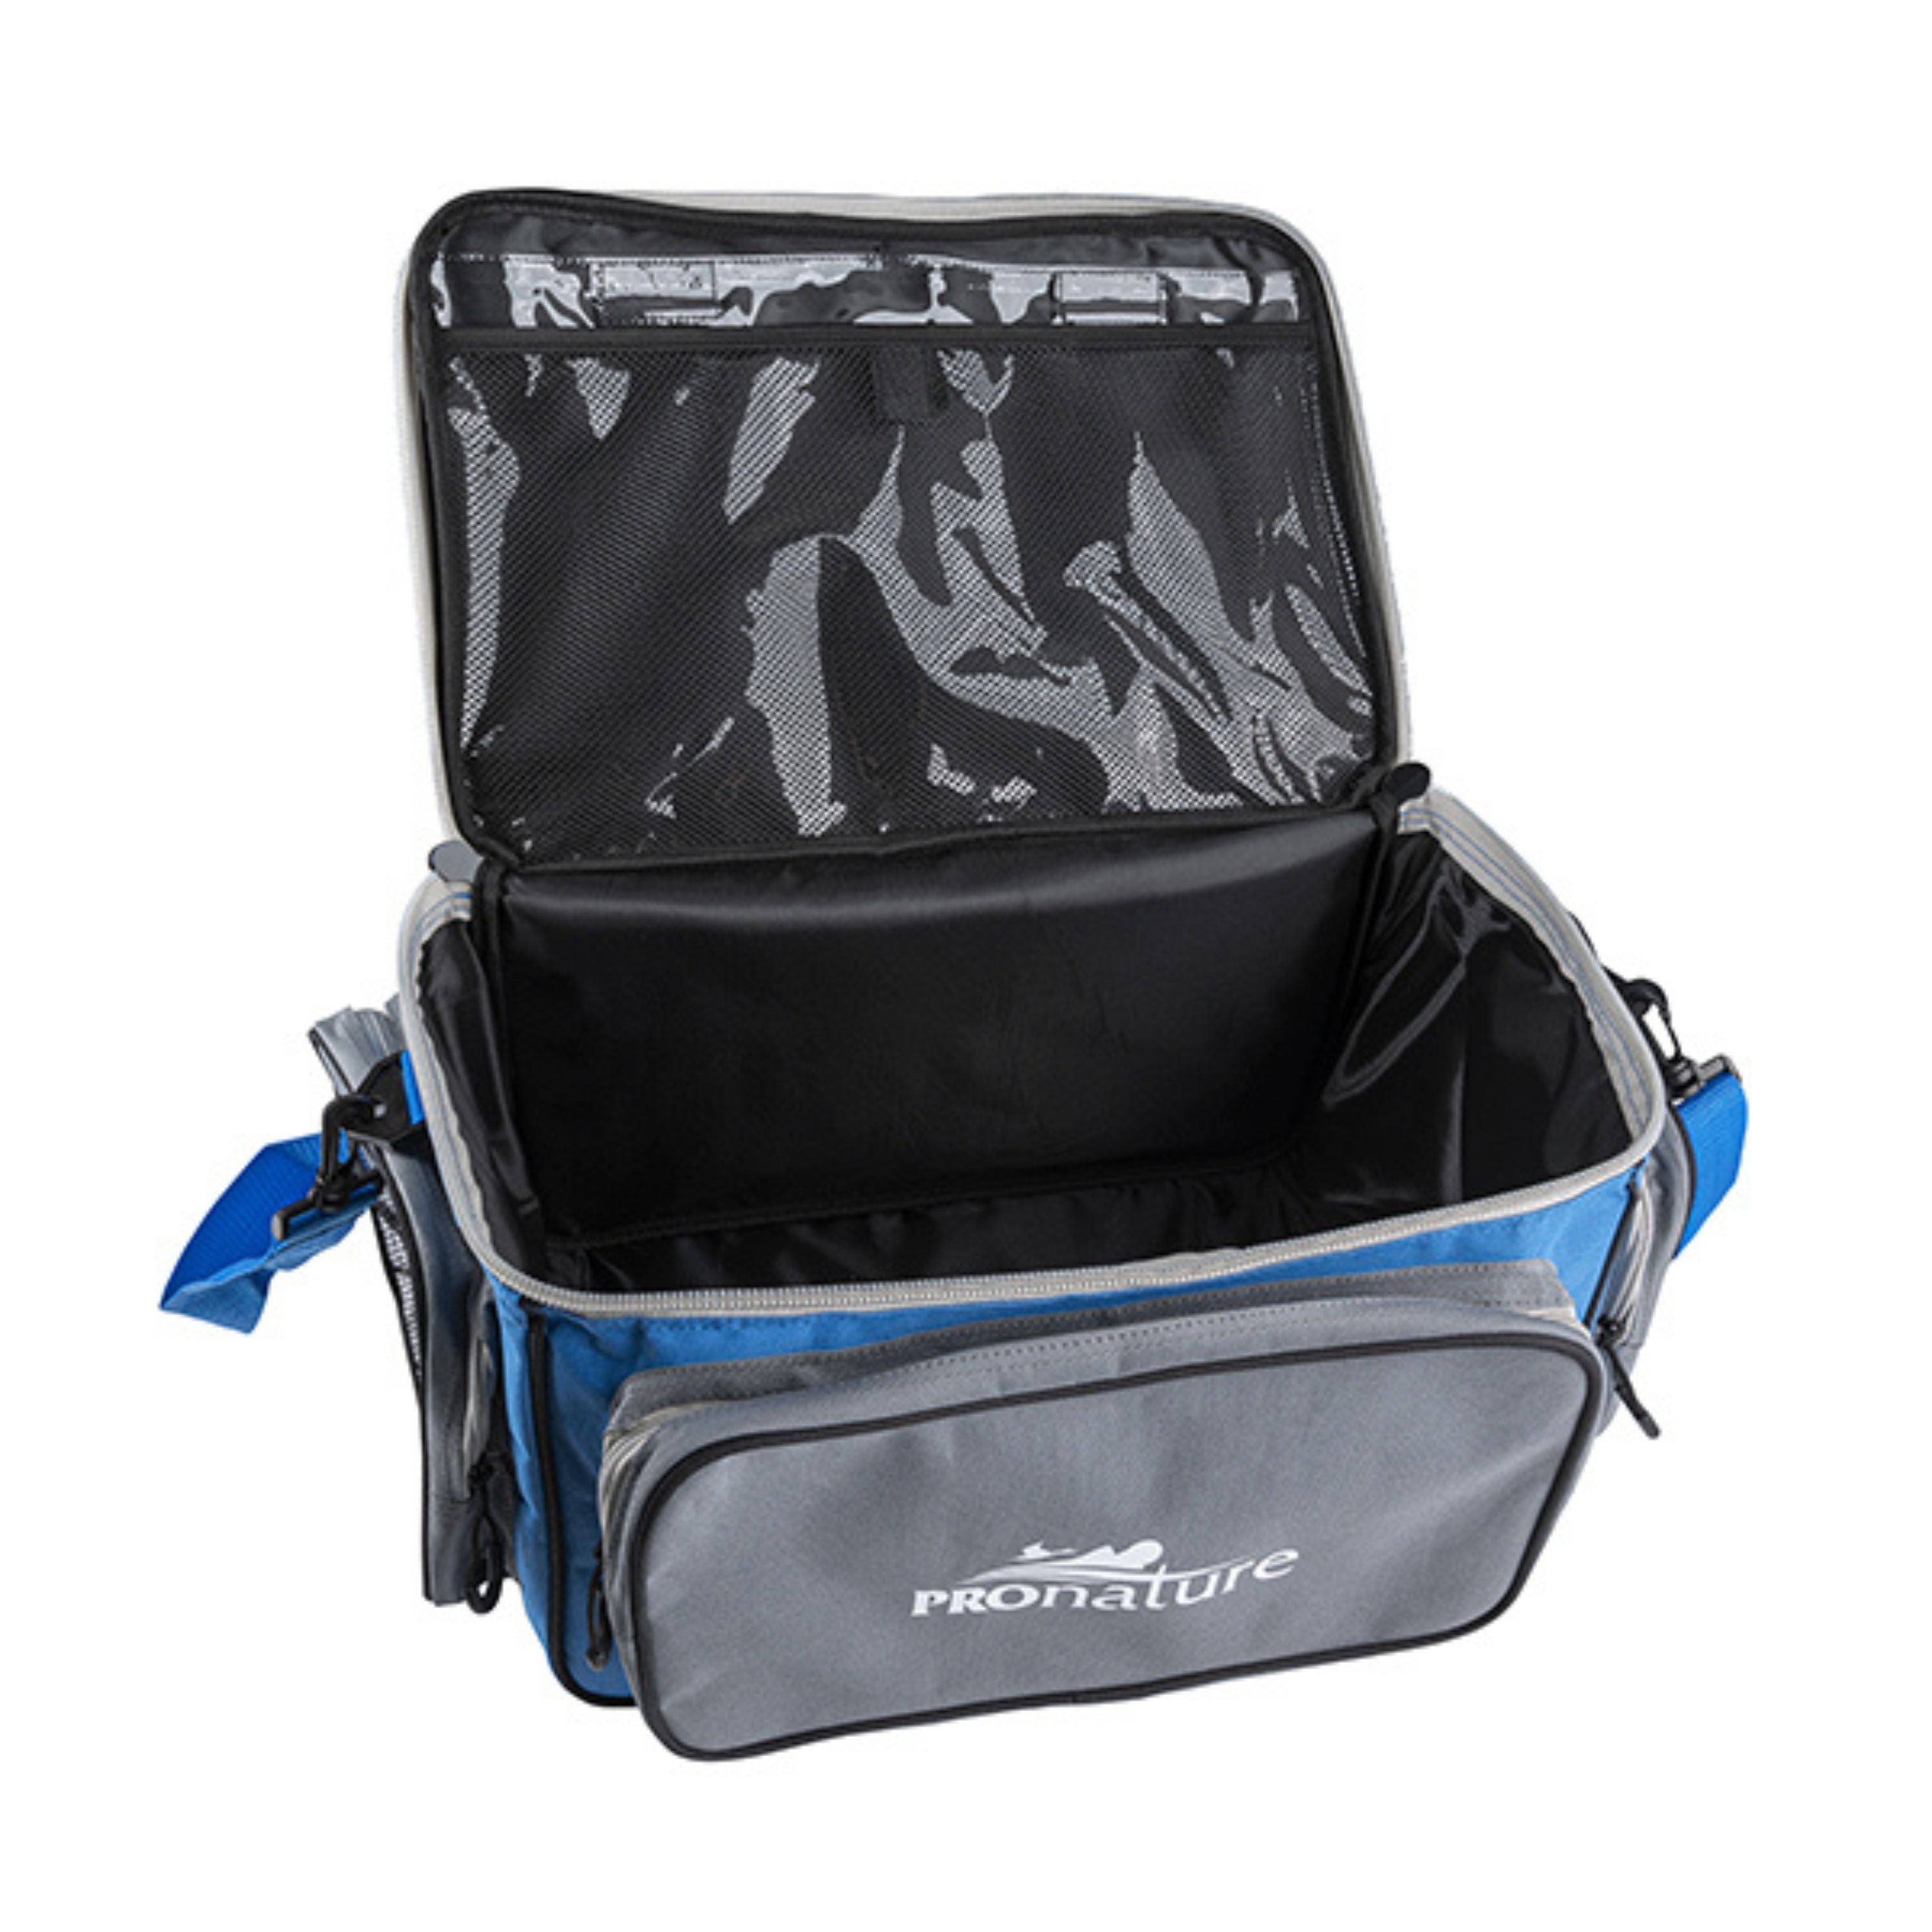 Big format fishing bag with tackle boxes